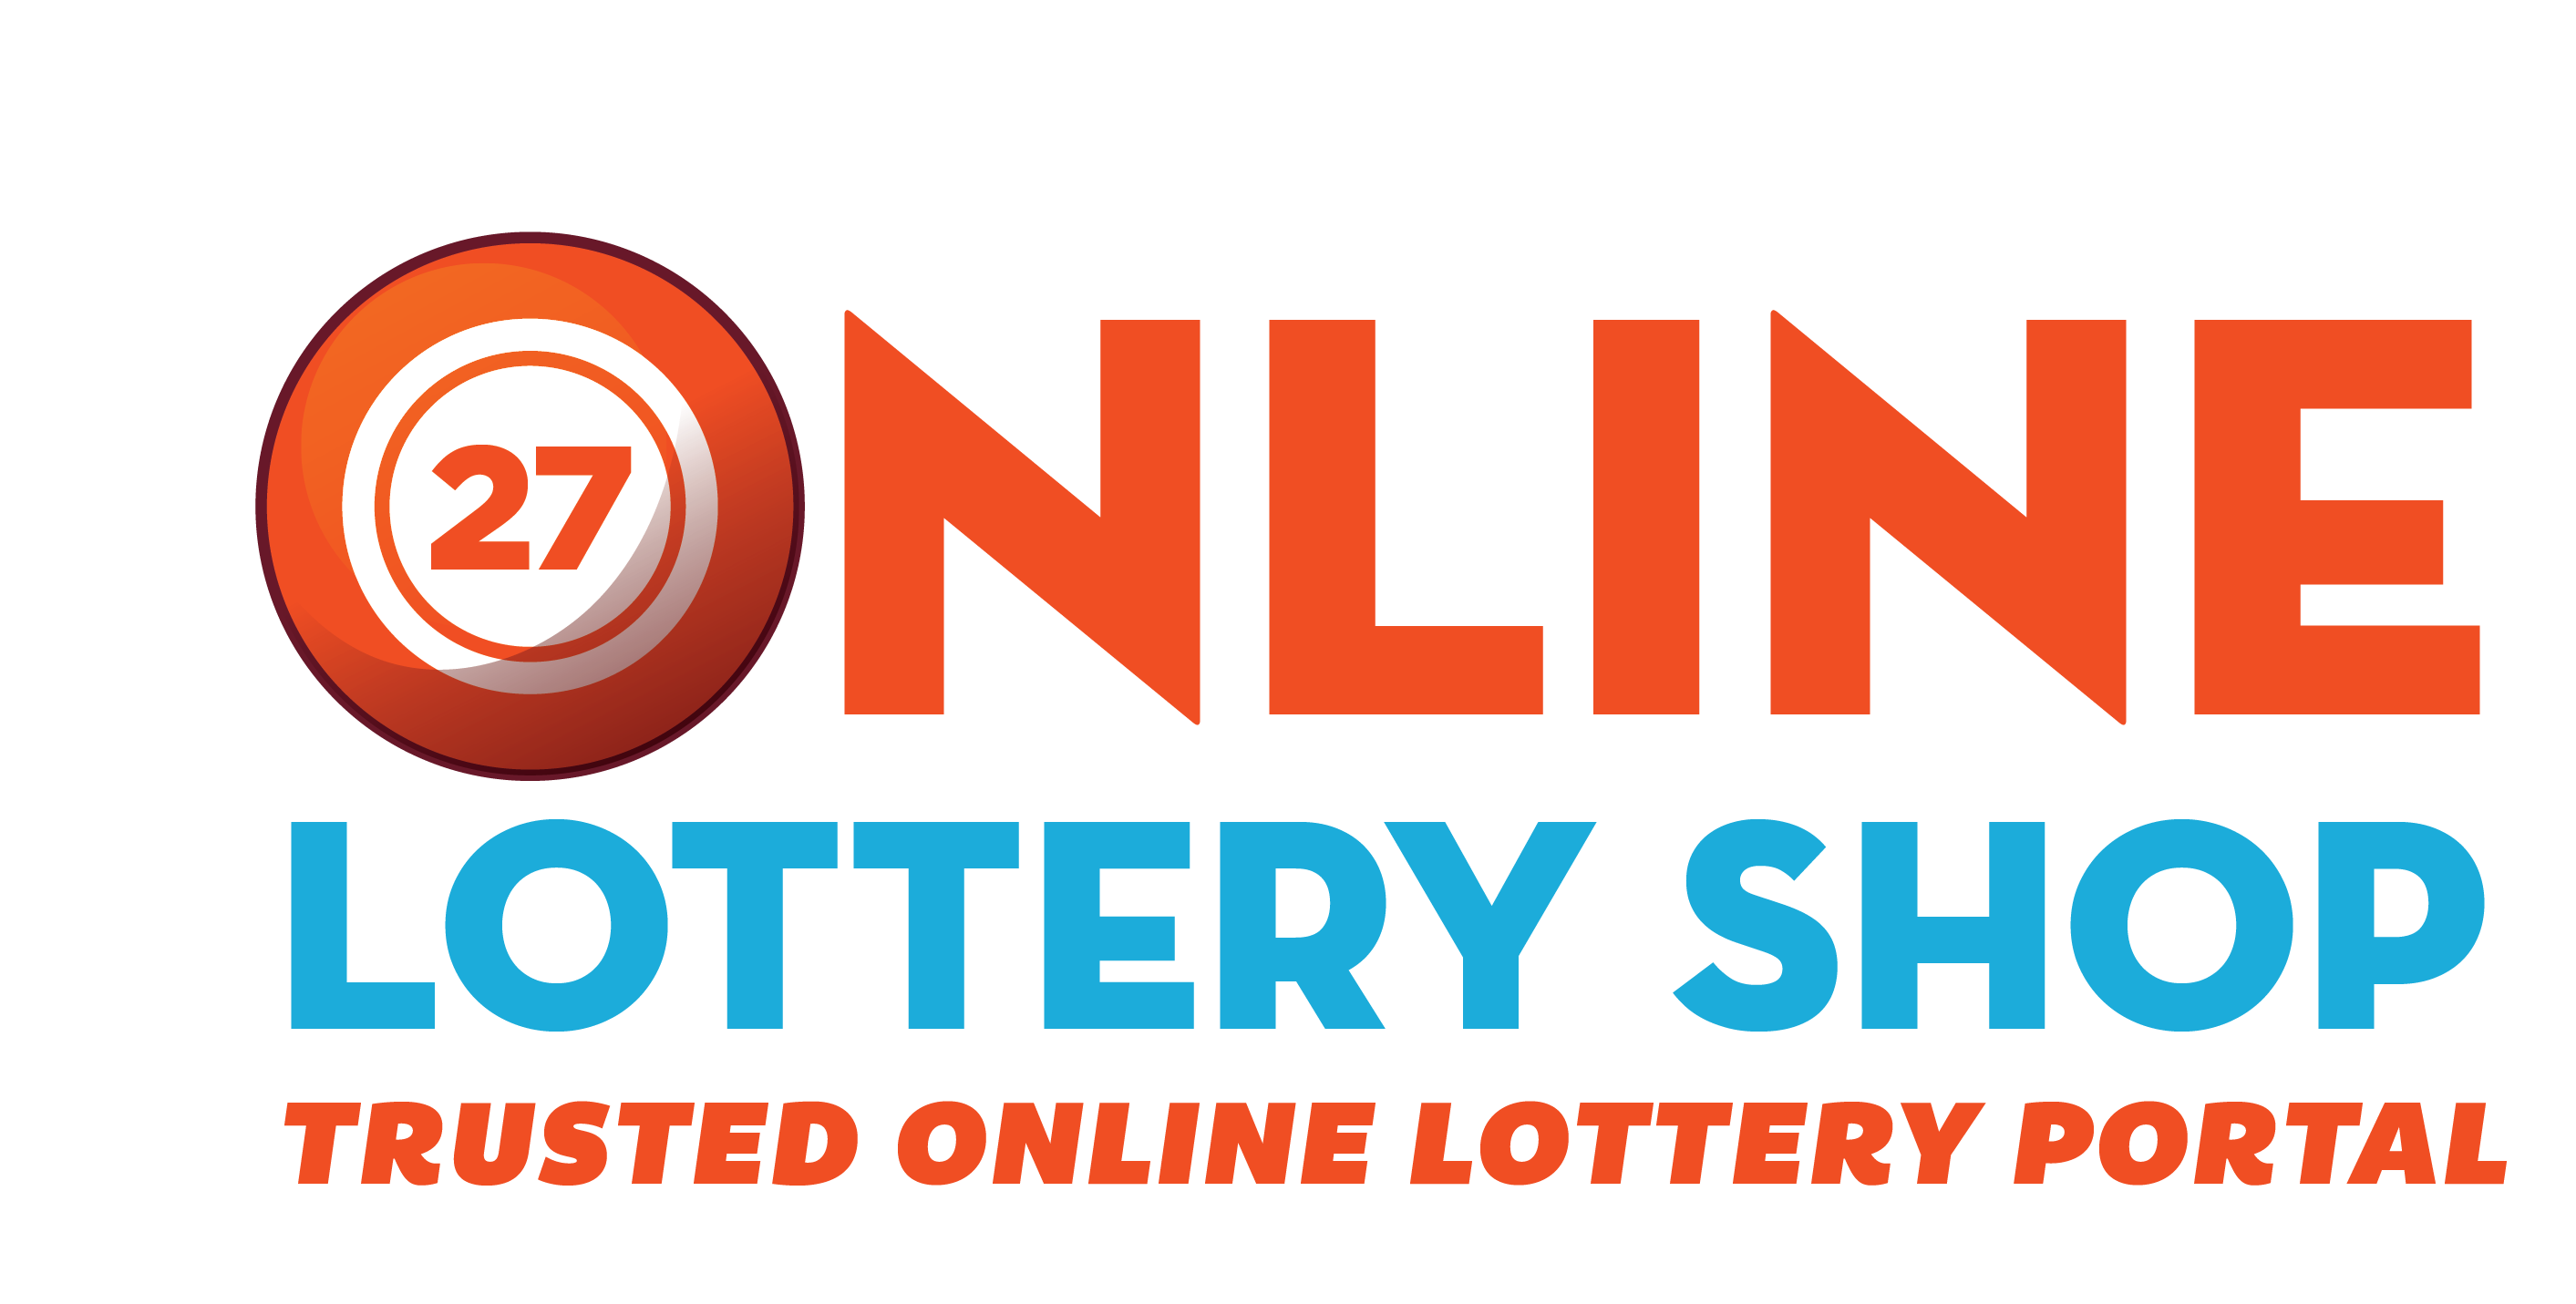 Buy Mega Millions tickets online through lottery agents - National  International Lottery